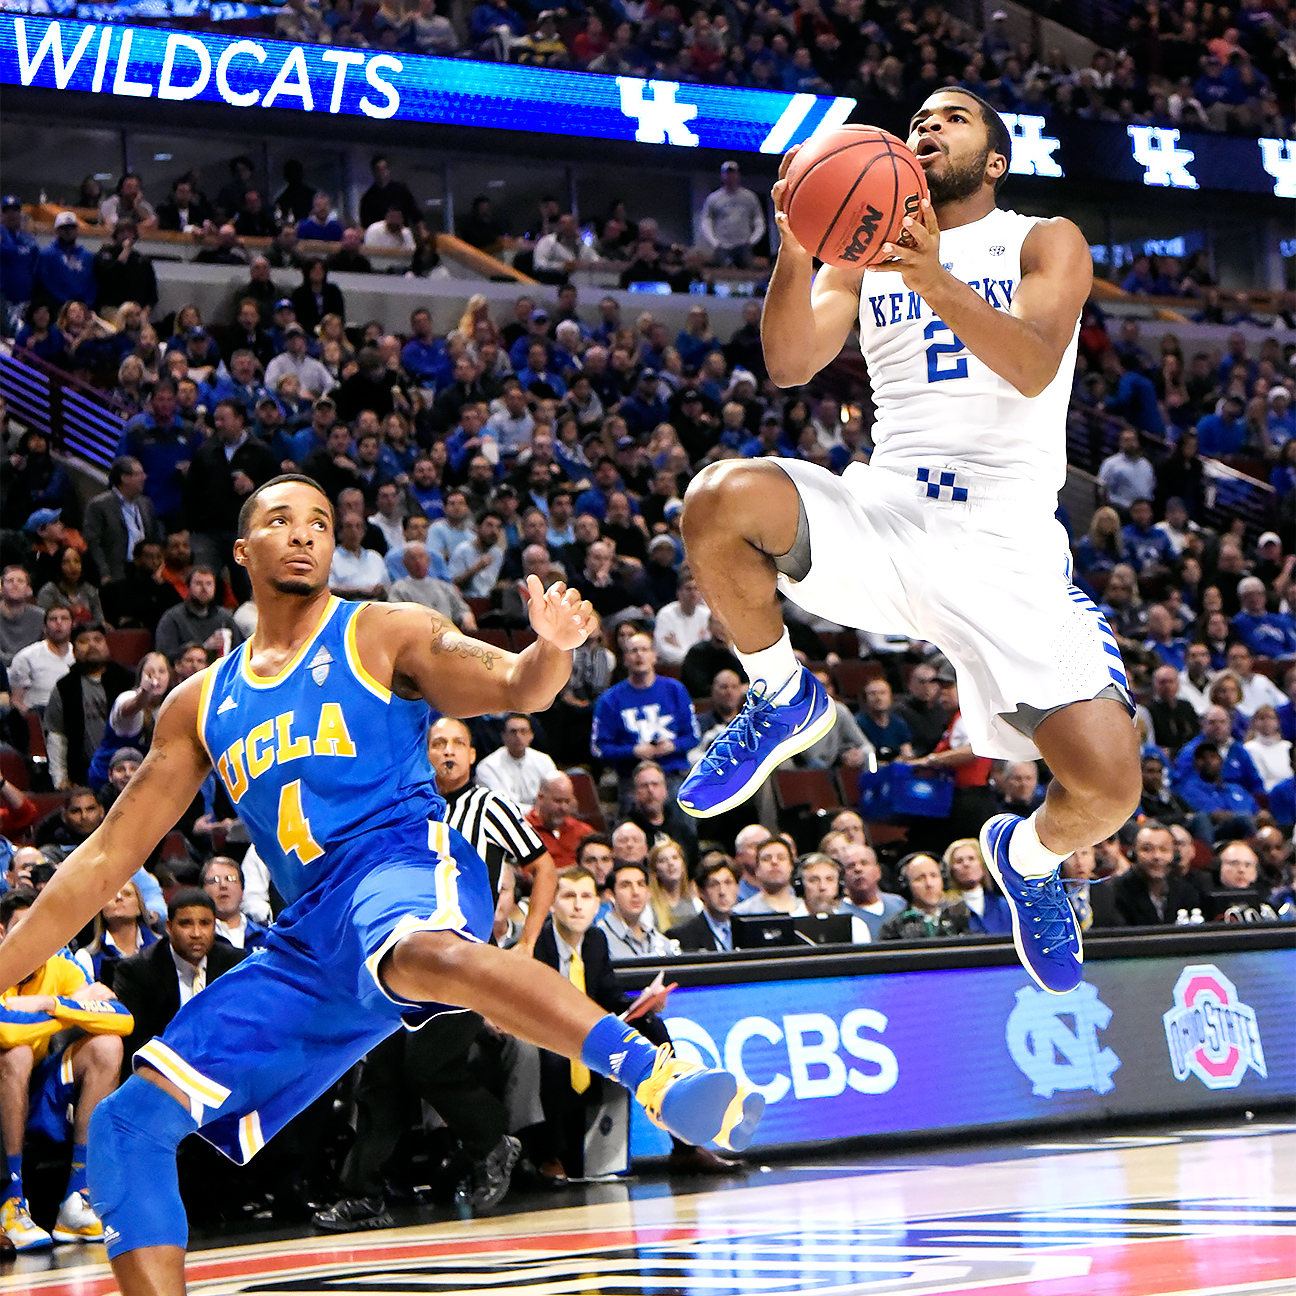 UCLA beats Kentucky at its own game — the freshman game